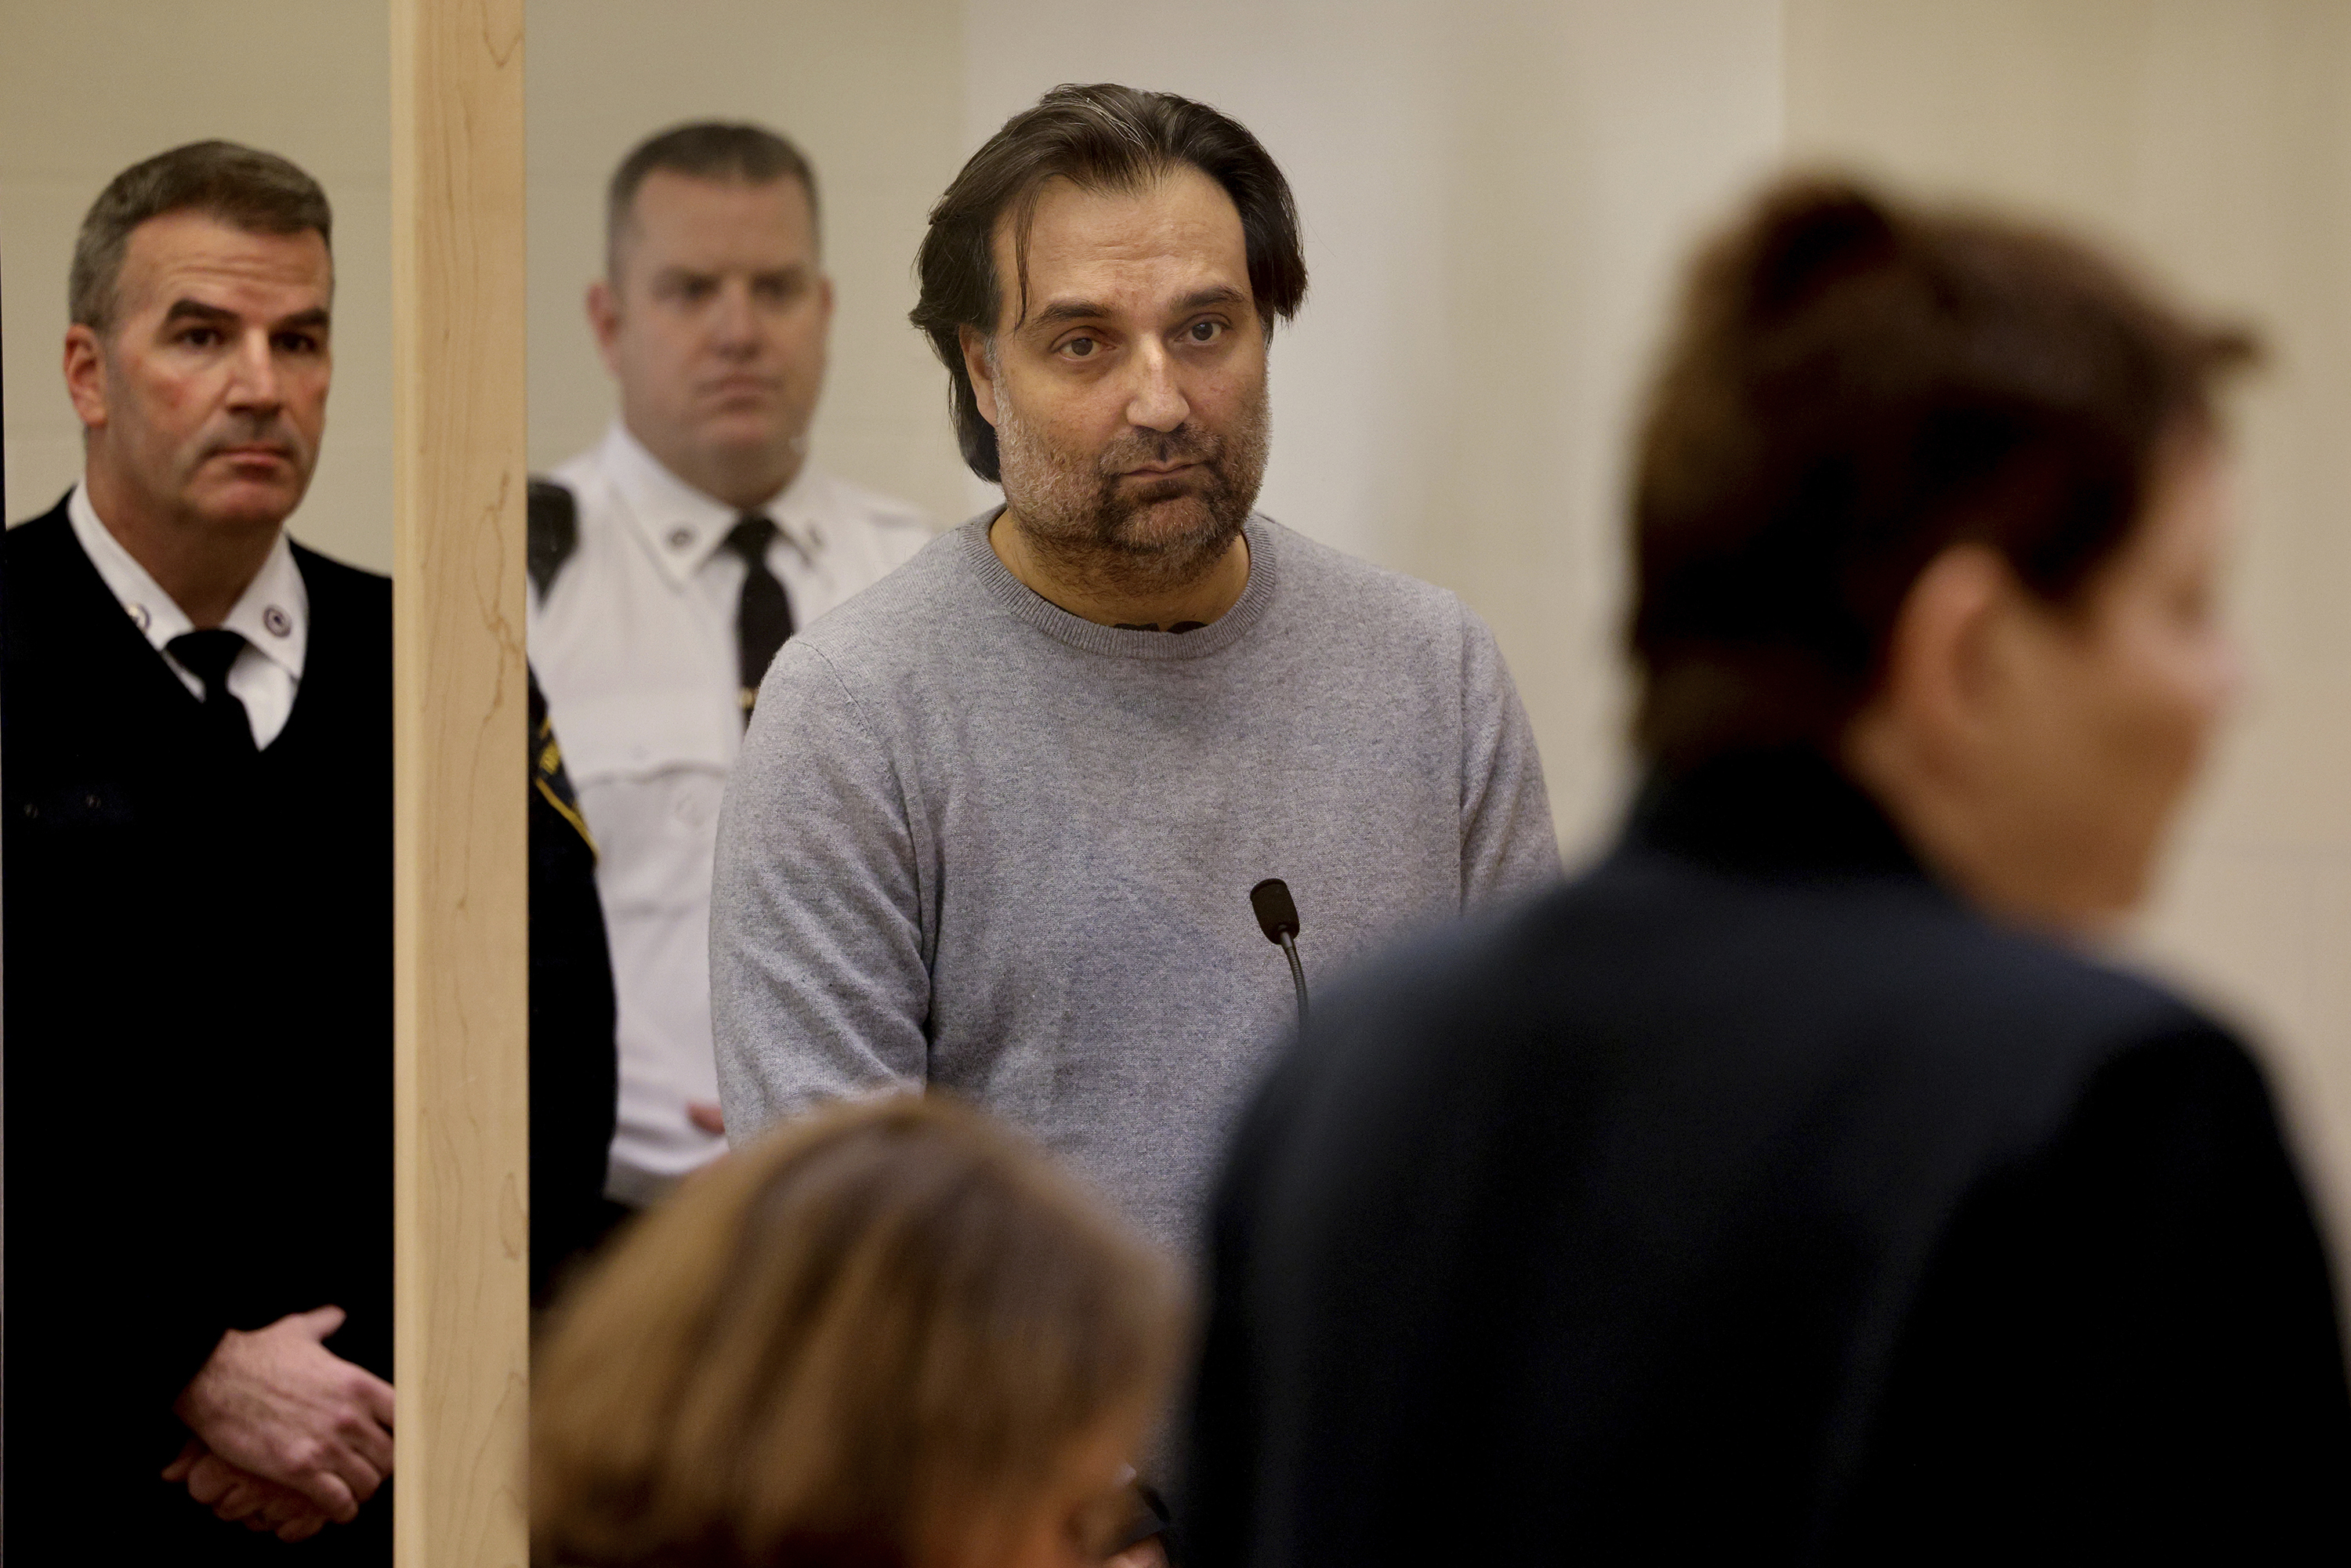 Brian Walshe, center, listens during his arraignment Wednesday, Jan. 18, 2023, at Quincy District Court, in Quincy, Mass., on a charge of murdering his wife Ana Walshe. Not guilty pleas were entered on behalf of Walshe, 47. Ana Walshe was reported missing Jan. 4, 2023 by her employer in Washington, where the couple has a home. (Craig F. Walker–The Boston Globe/AP/Pool)